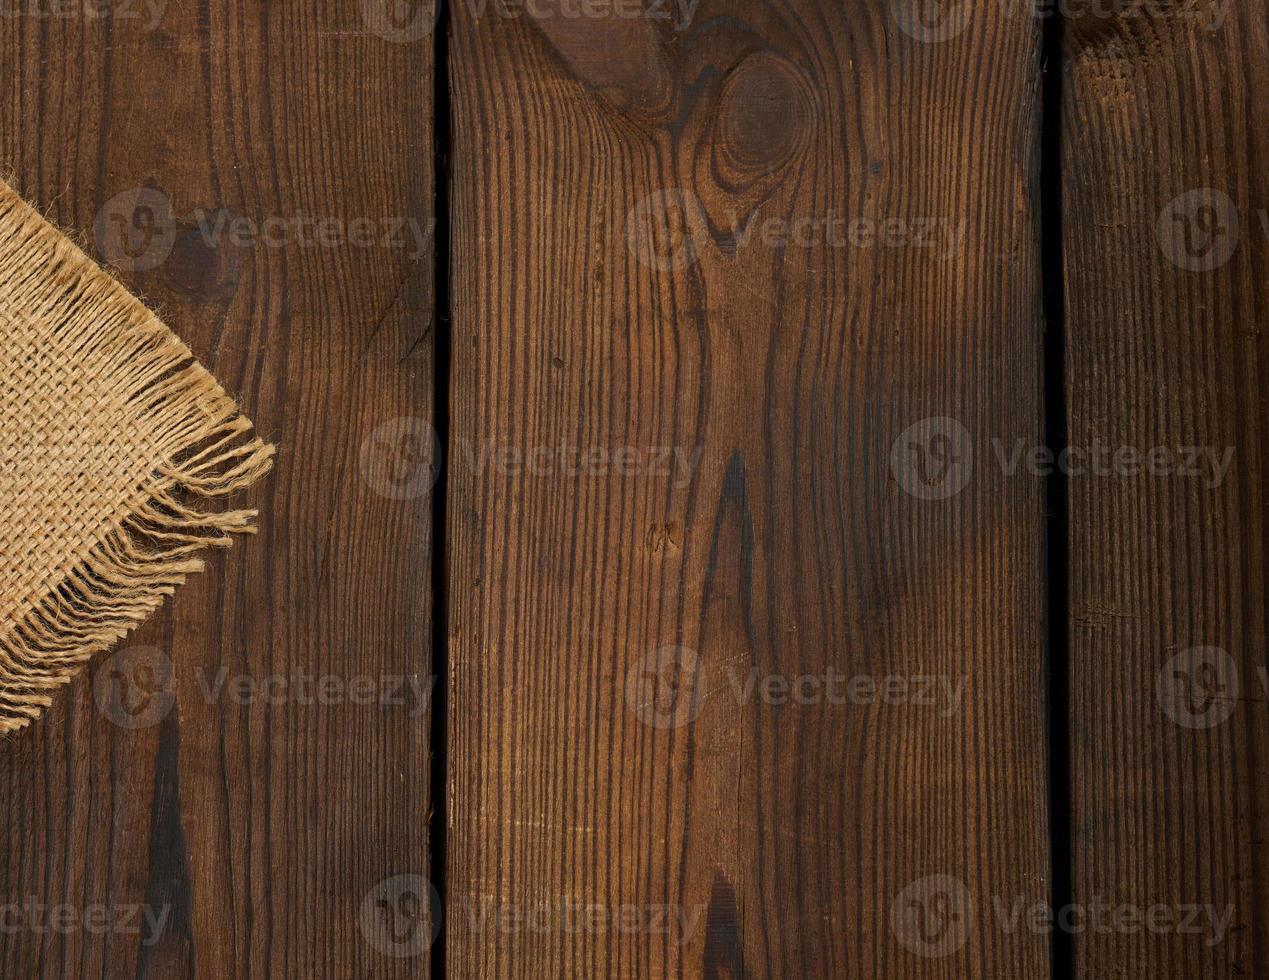 Background of brown wooden boards with cracks, scuffs. Backdrop for compositions, rustic photo